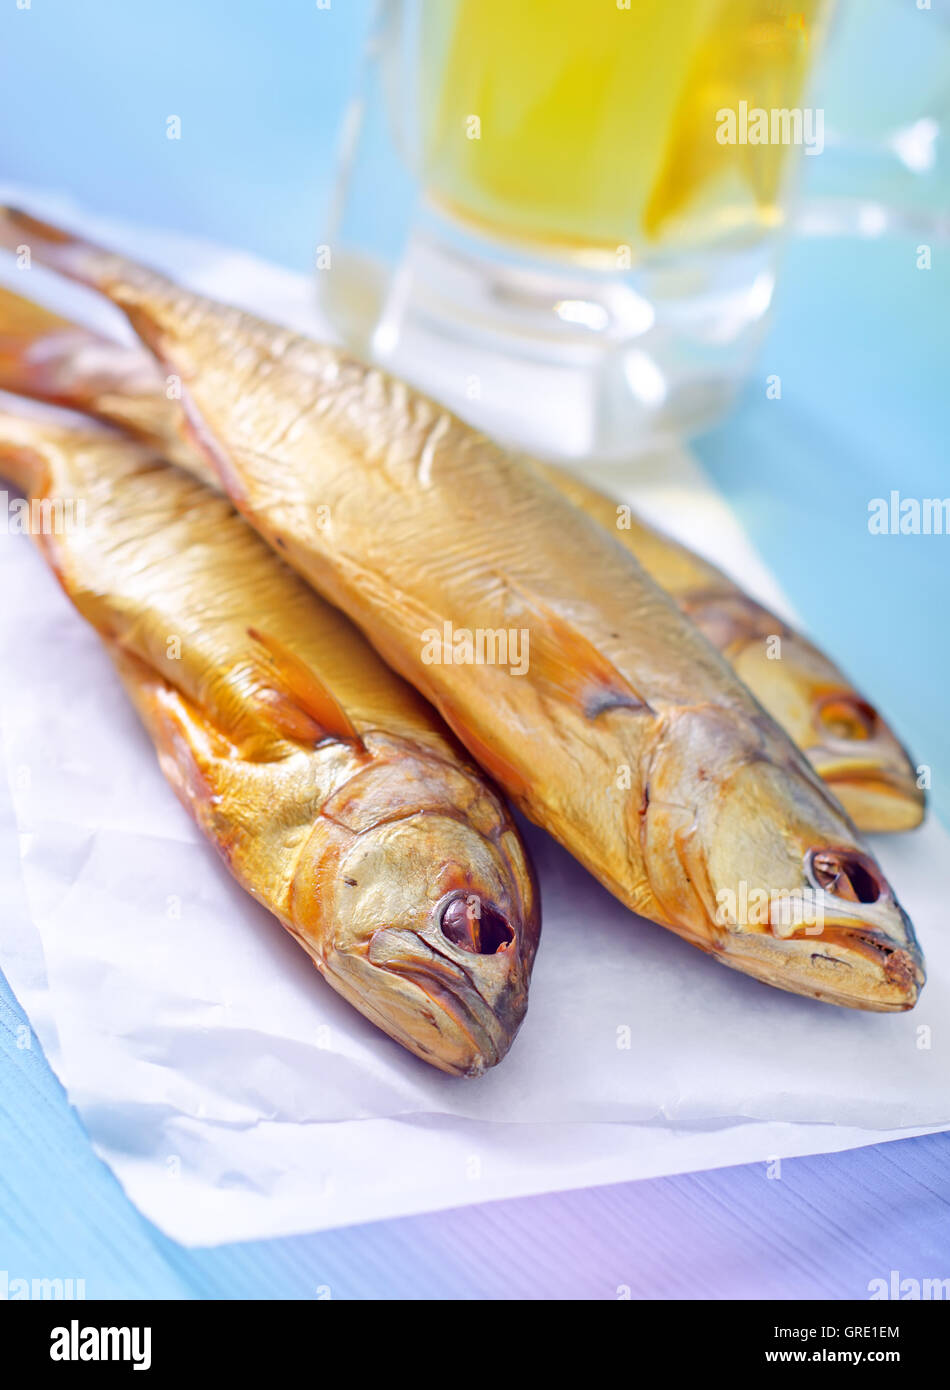 smoked fish with beer Stock Photo